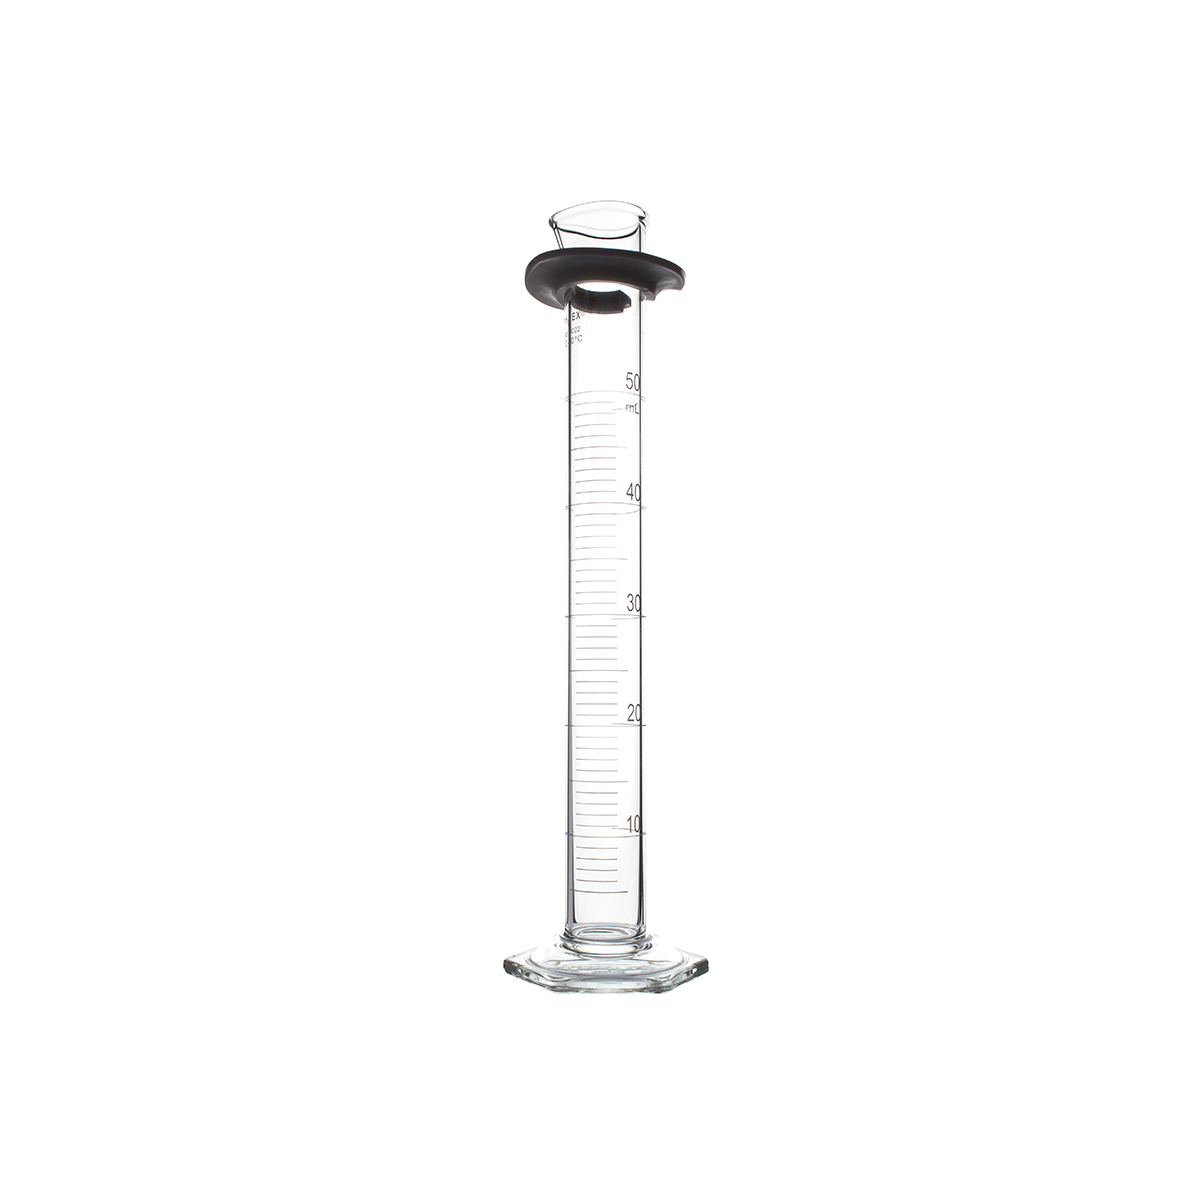 Corning 2982-50 Pyrex Single Metric Scale Cylinder with Standard Taper Stopper 50 mL TC White Graduation 